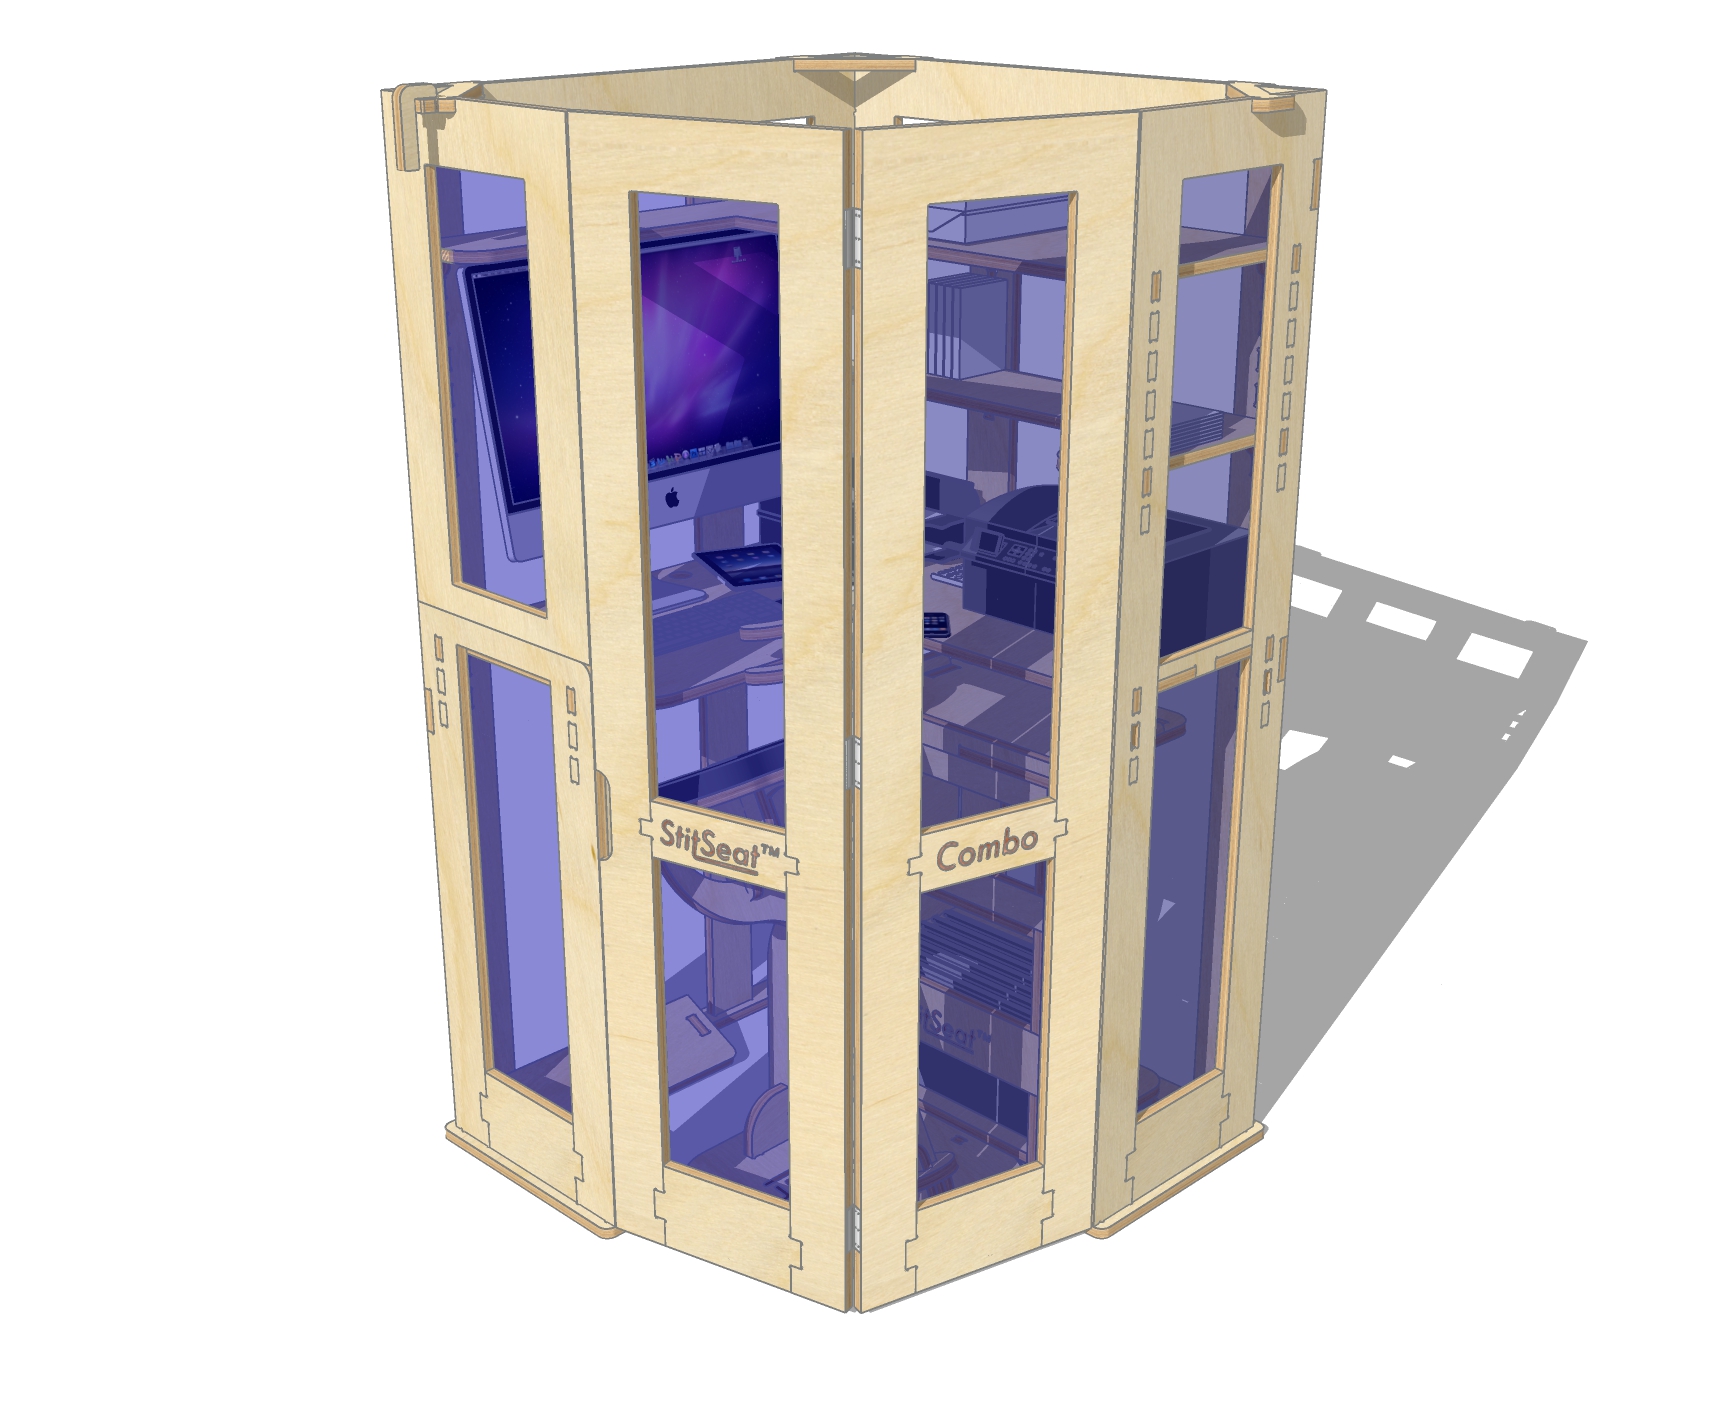 Image shows half left-hand panel attached to folding doors